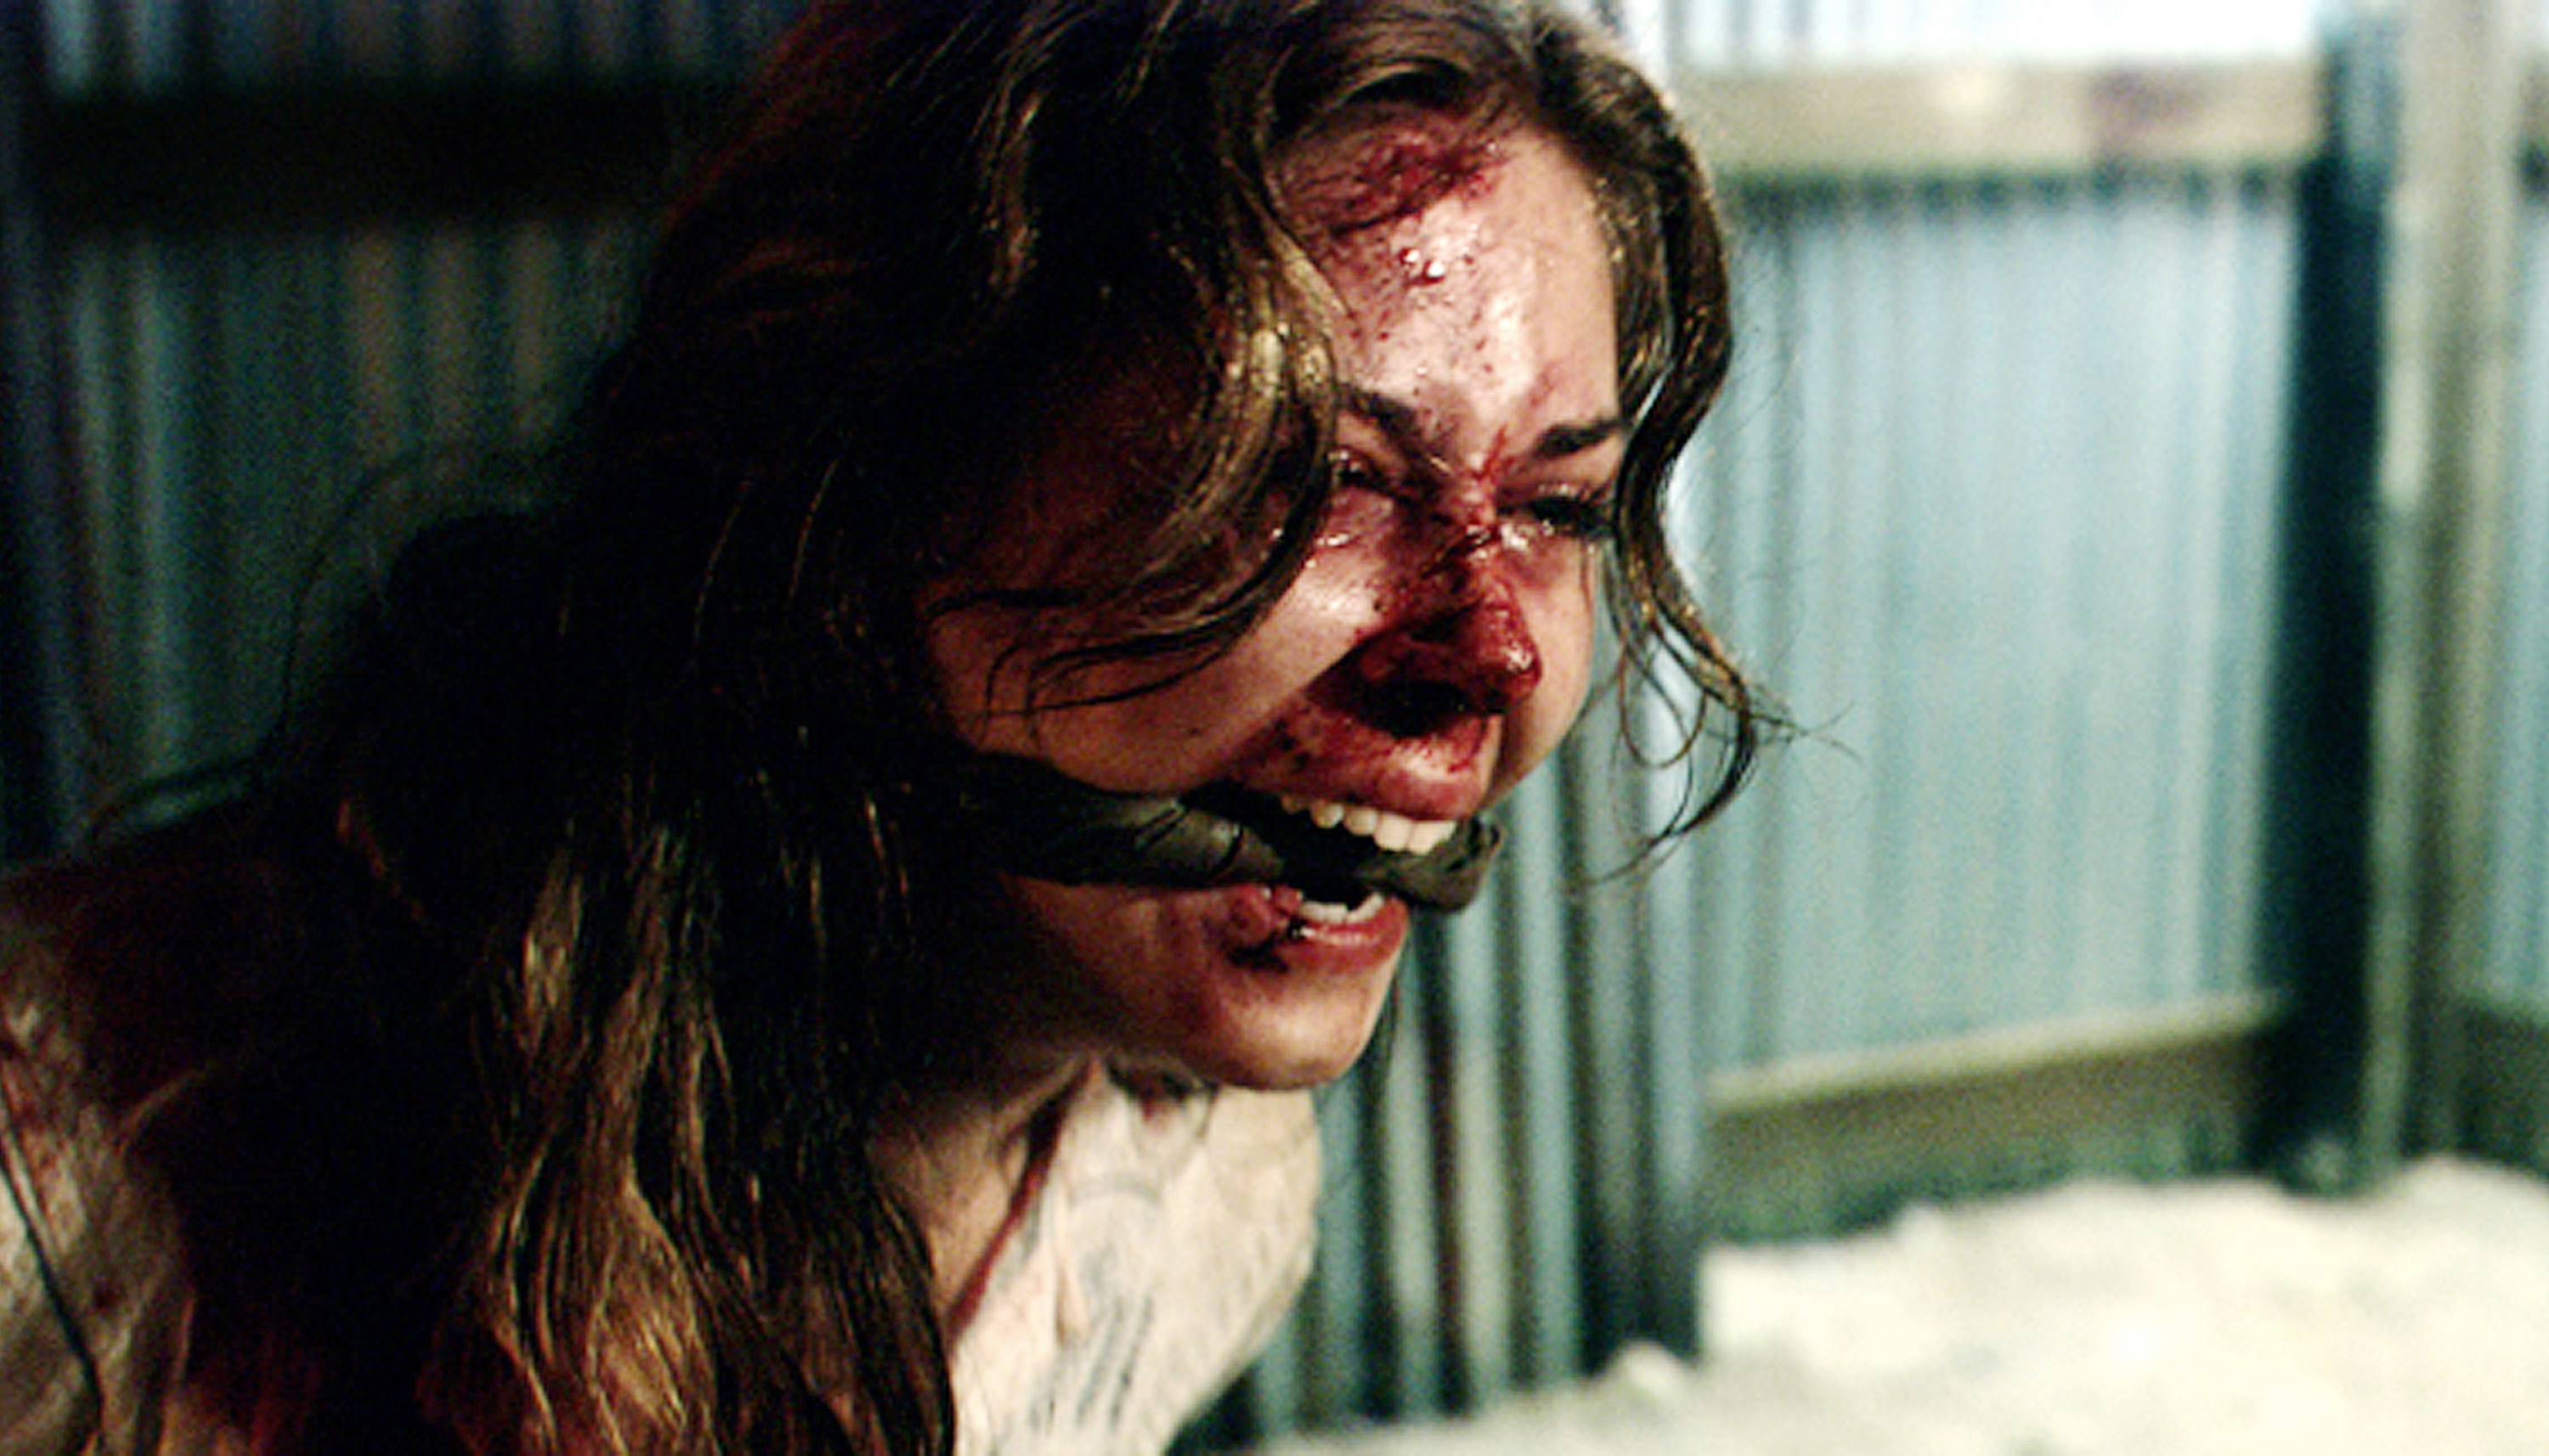 A bloodied woman with a gag in her mouth